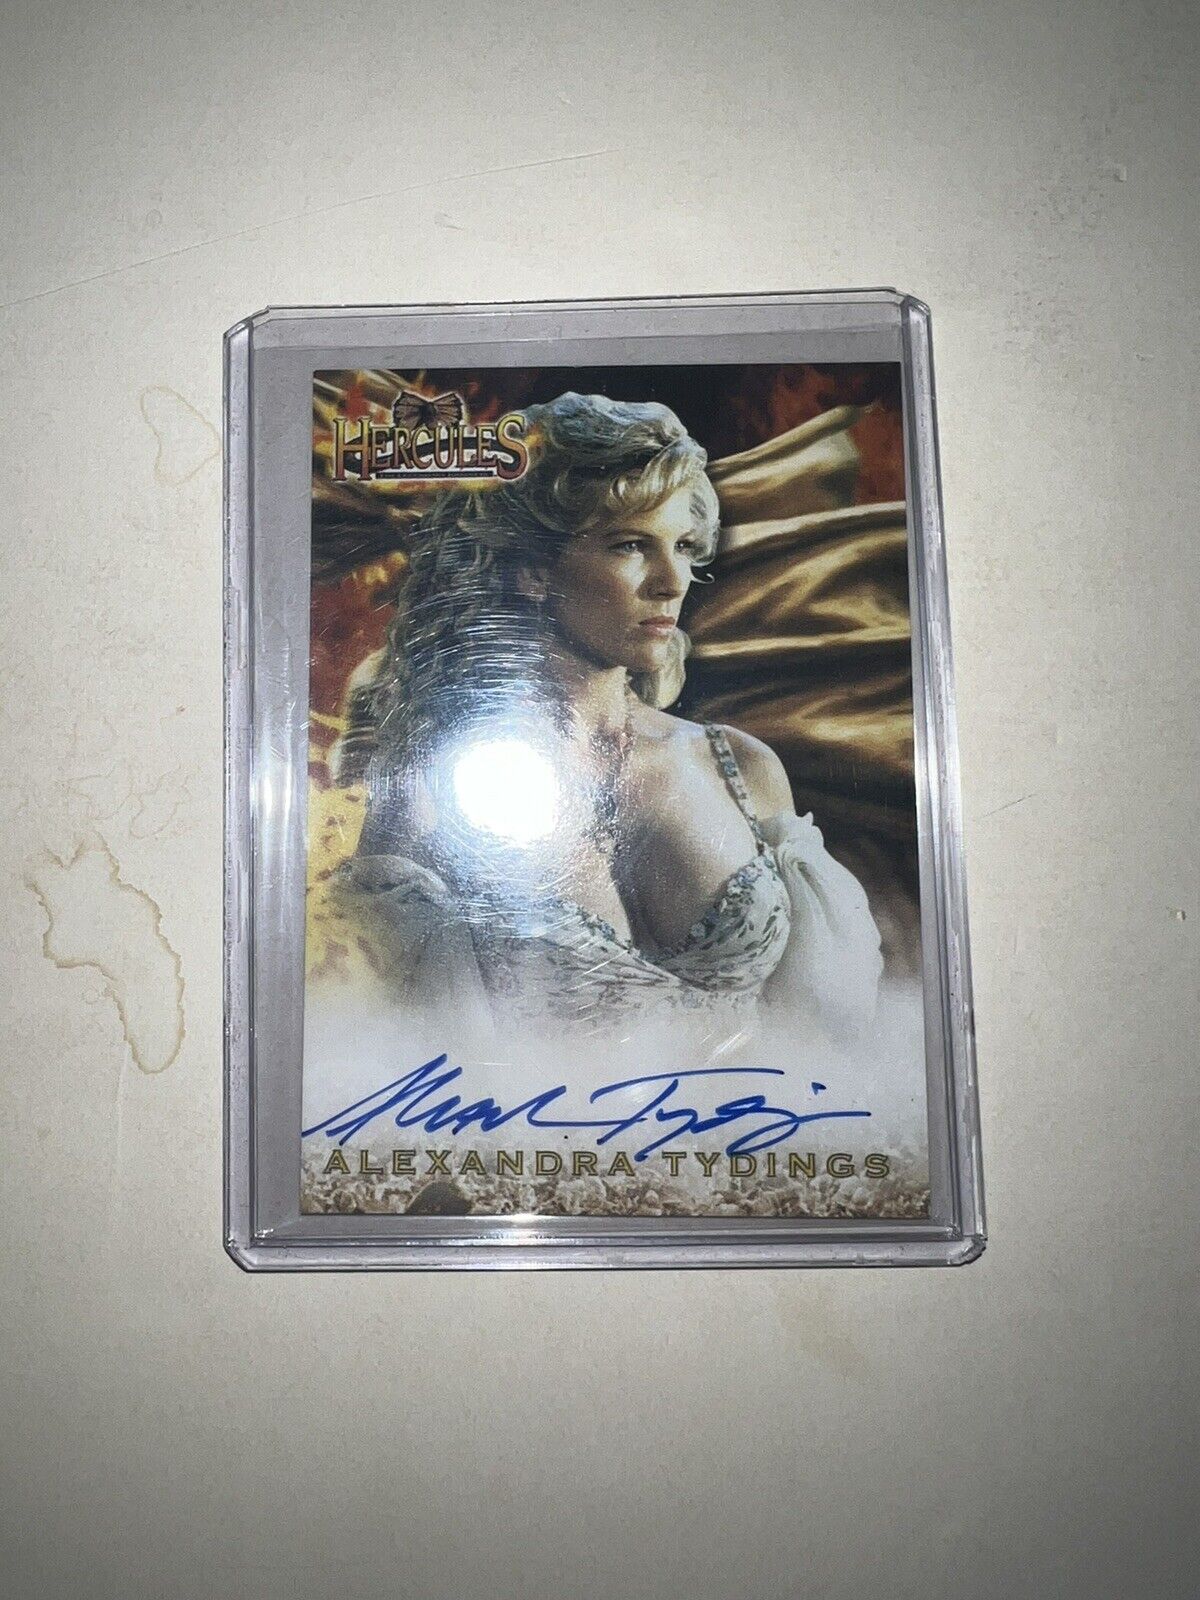 HERCULES 2001 THE COMPLETE JOURNEYS A17 ALEXANDRA TYDINGS AS APHRODITE AUTO Card